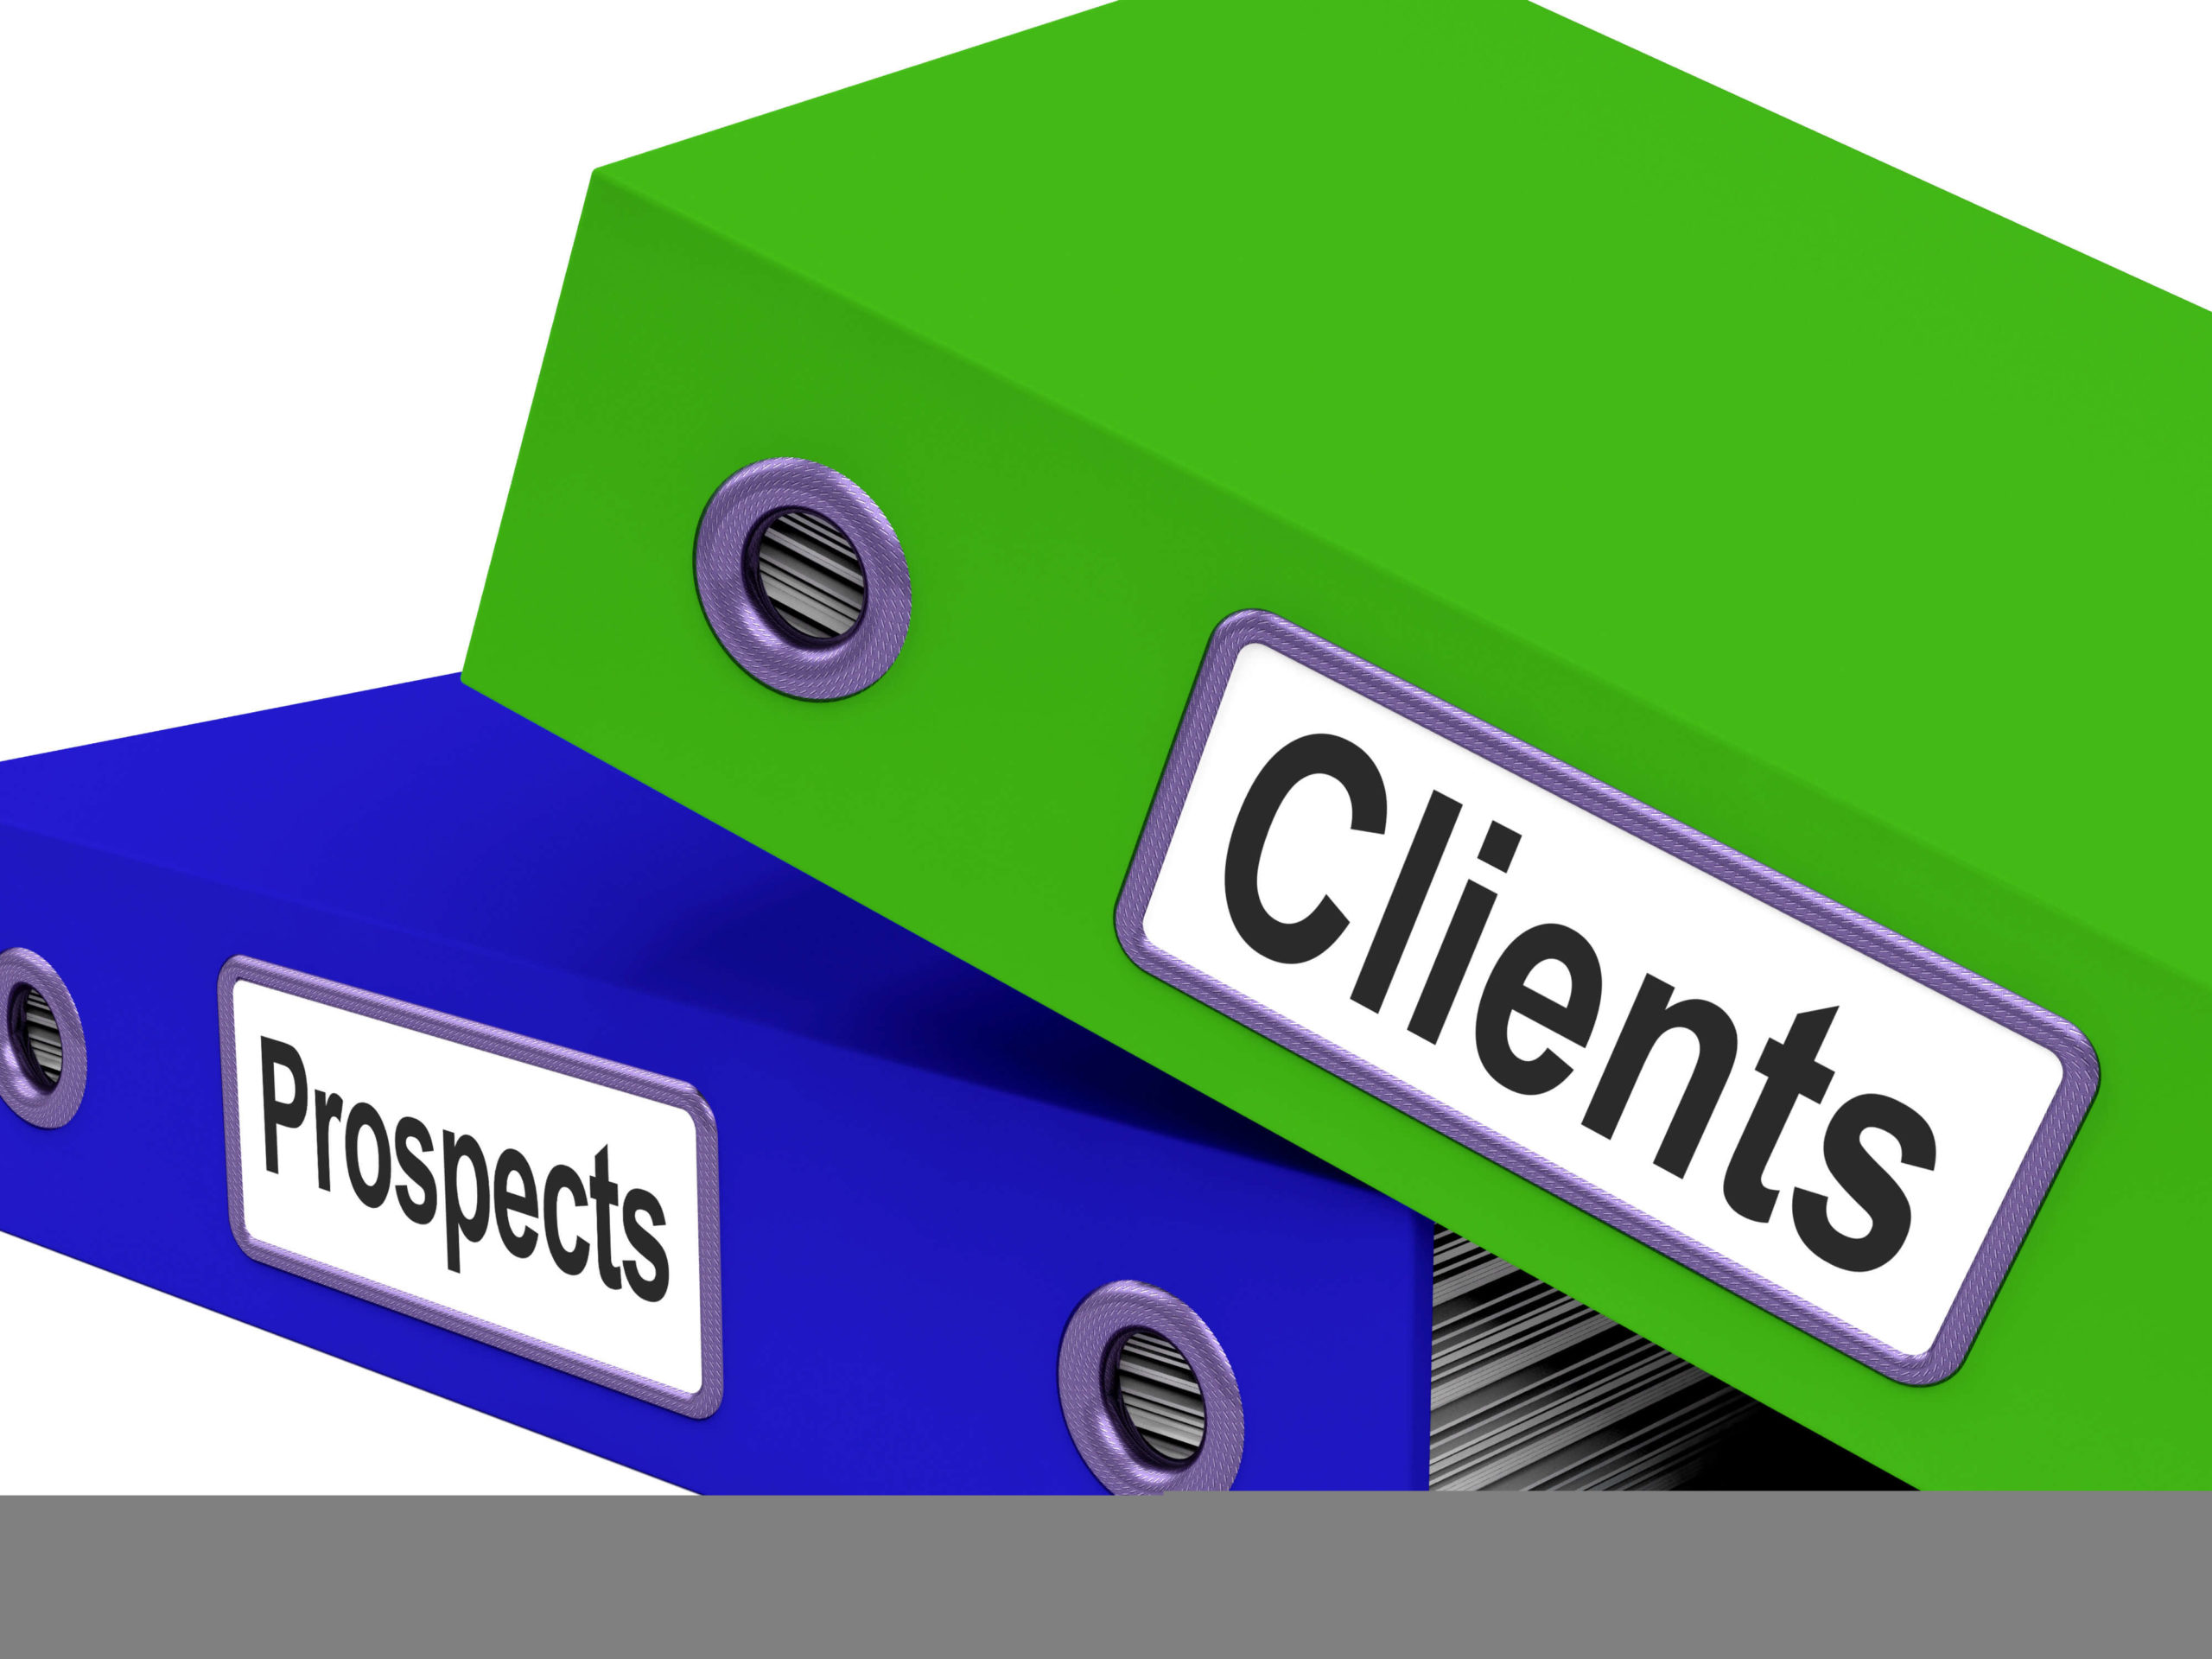 Prospecting Objectives for Freight Brokers